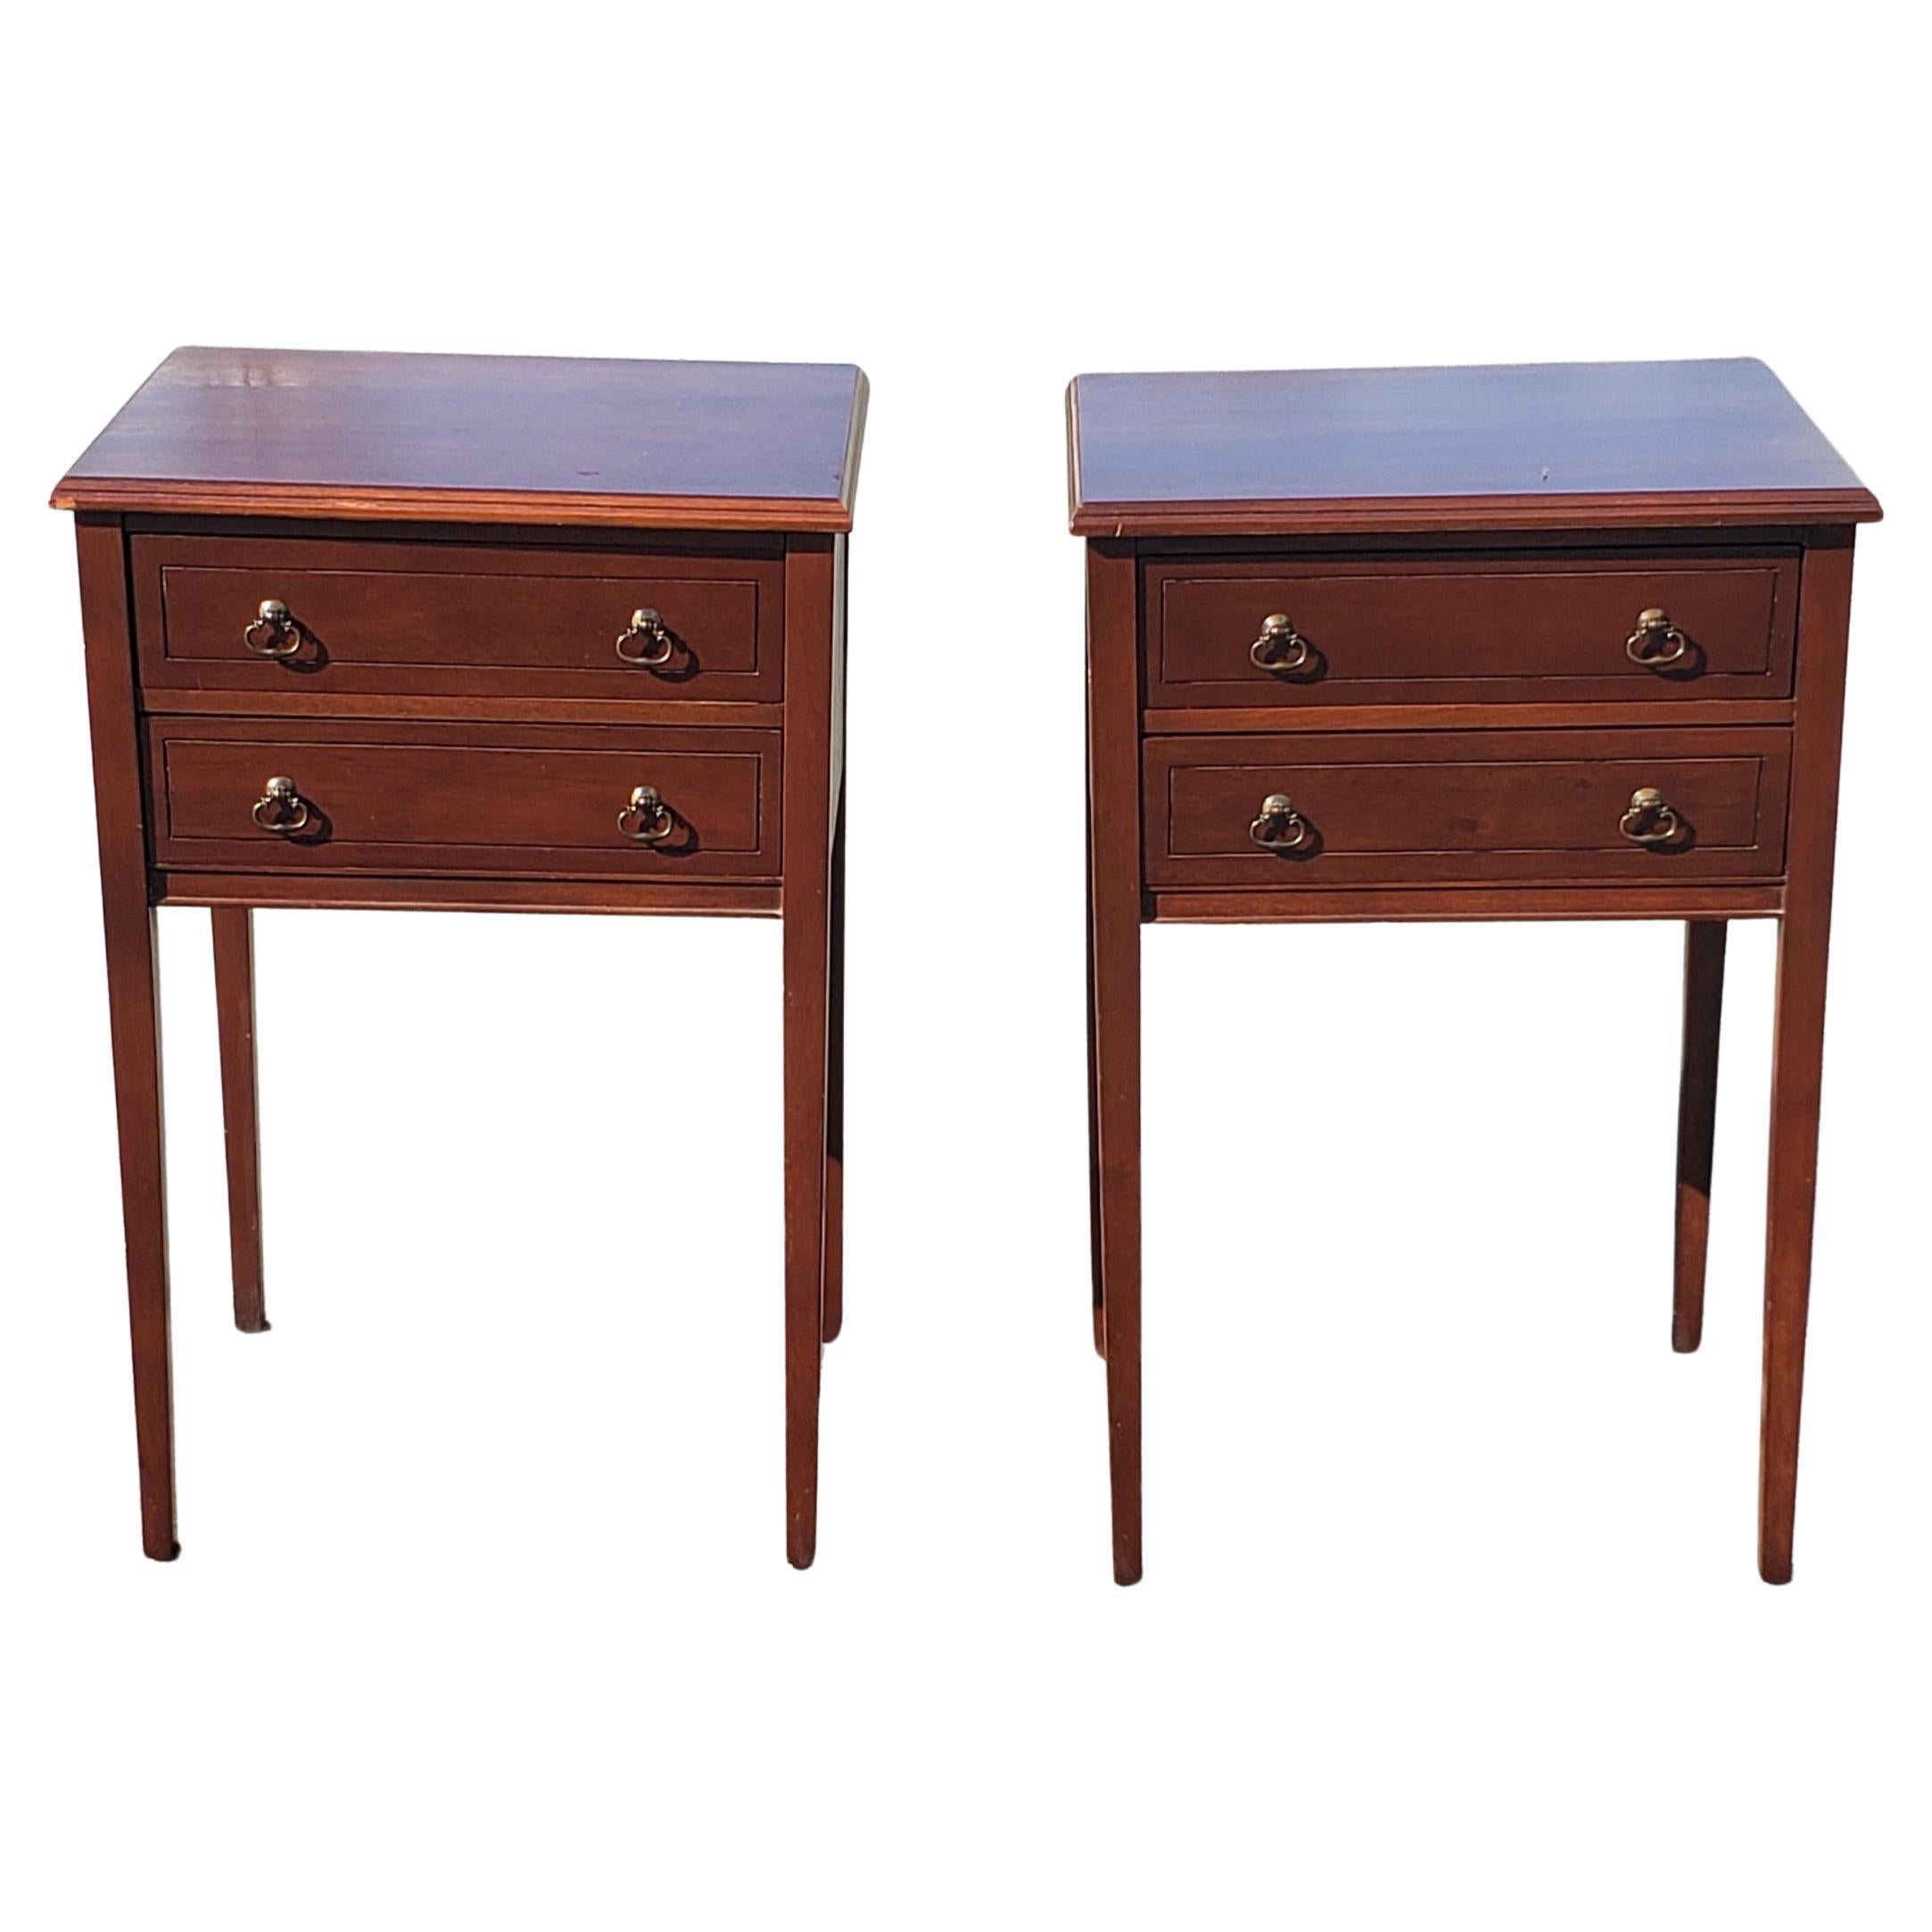 1940s Regency Two-Drawers Mahogany Side Tables by Mersman Furniture, a Pair For Sale